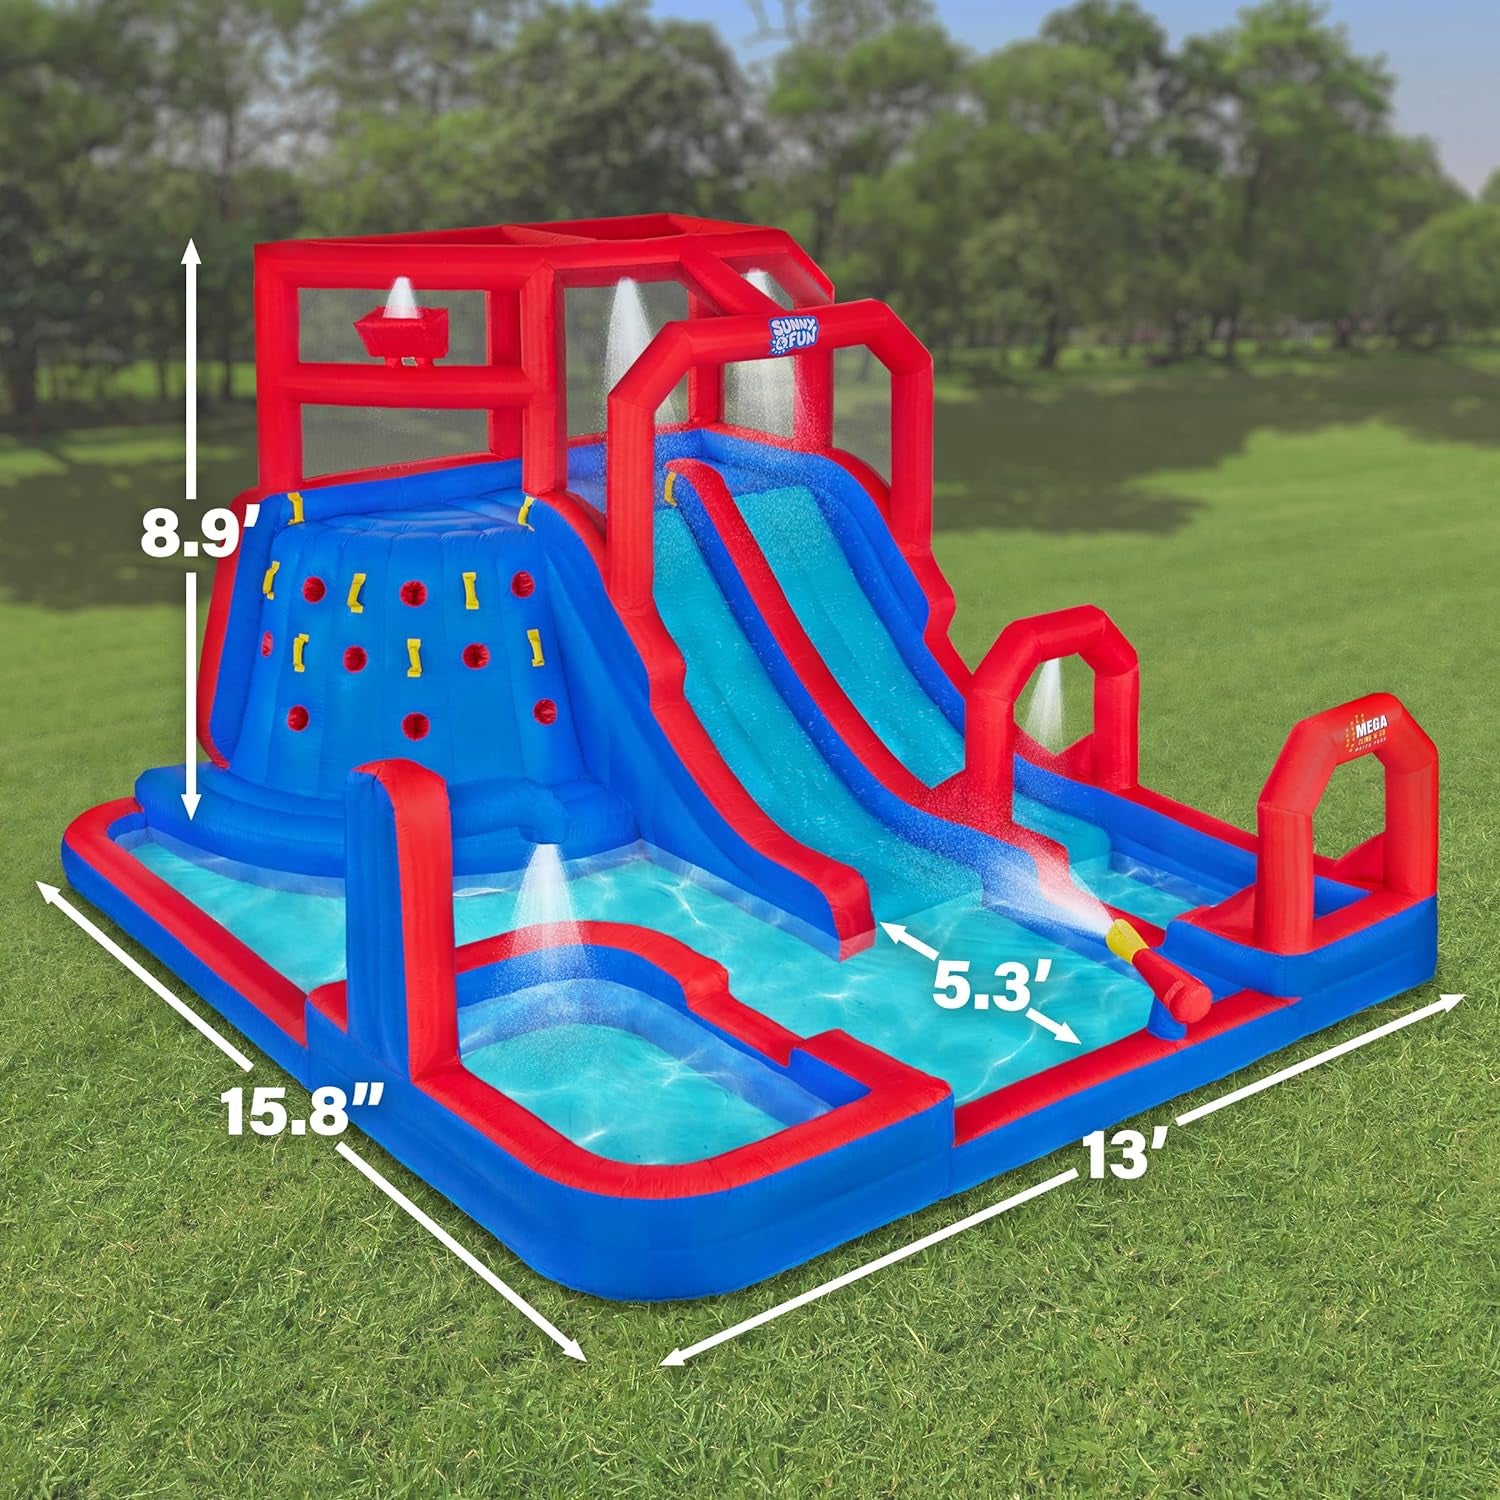 Mega Climb N’ Go Inflatable Water Slide Park – Heavy-Duty for Outdoor Fun - Climbing Wall, 2 Slides, Splash & Deep Pool – Easy to Set up & Inflate with Included Air Pump & Carrying Case